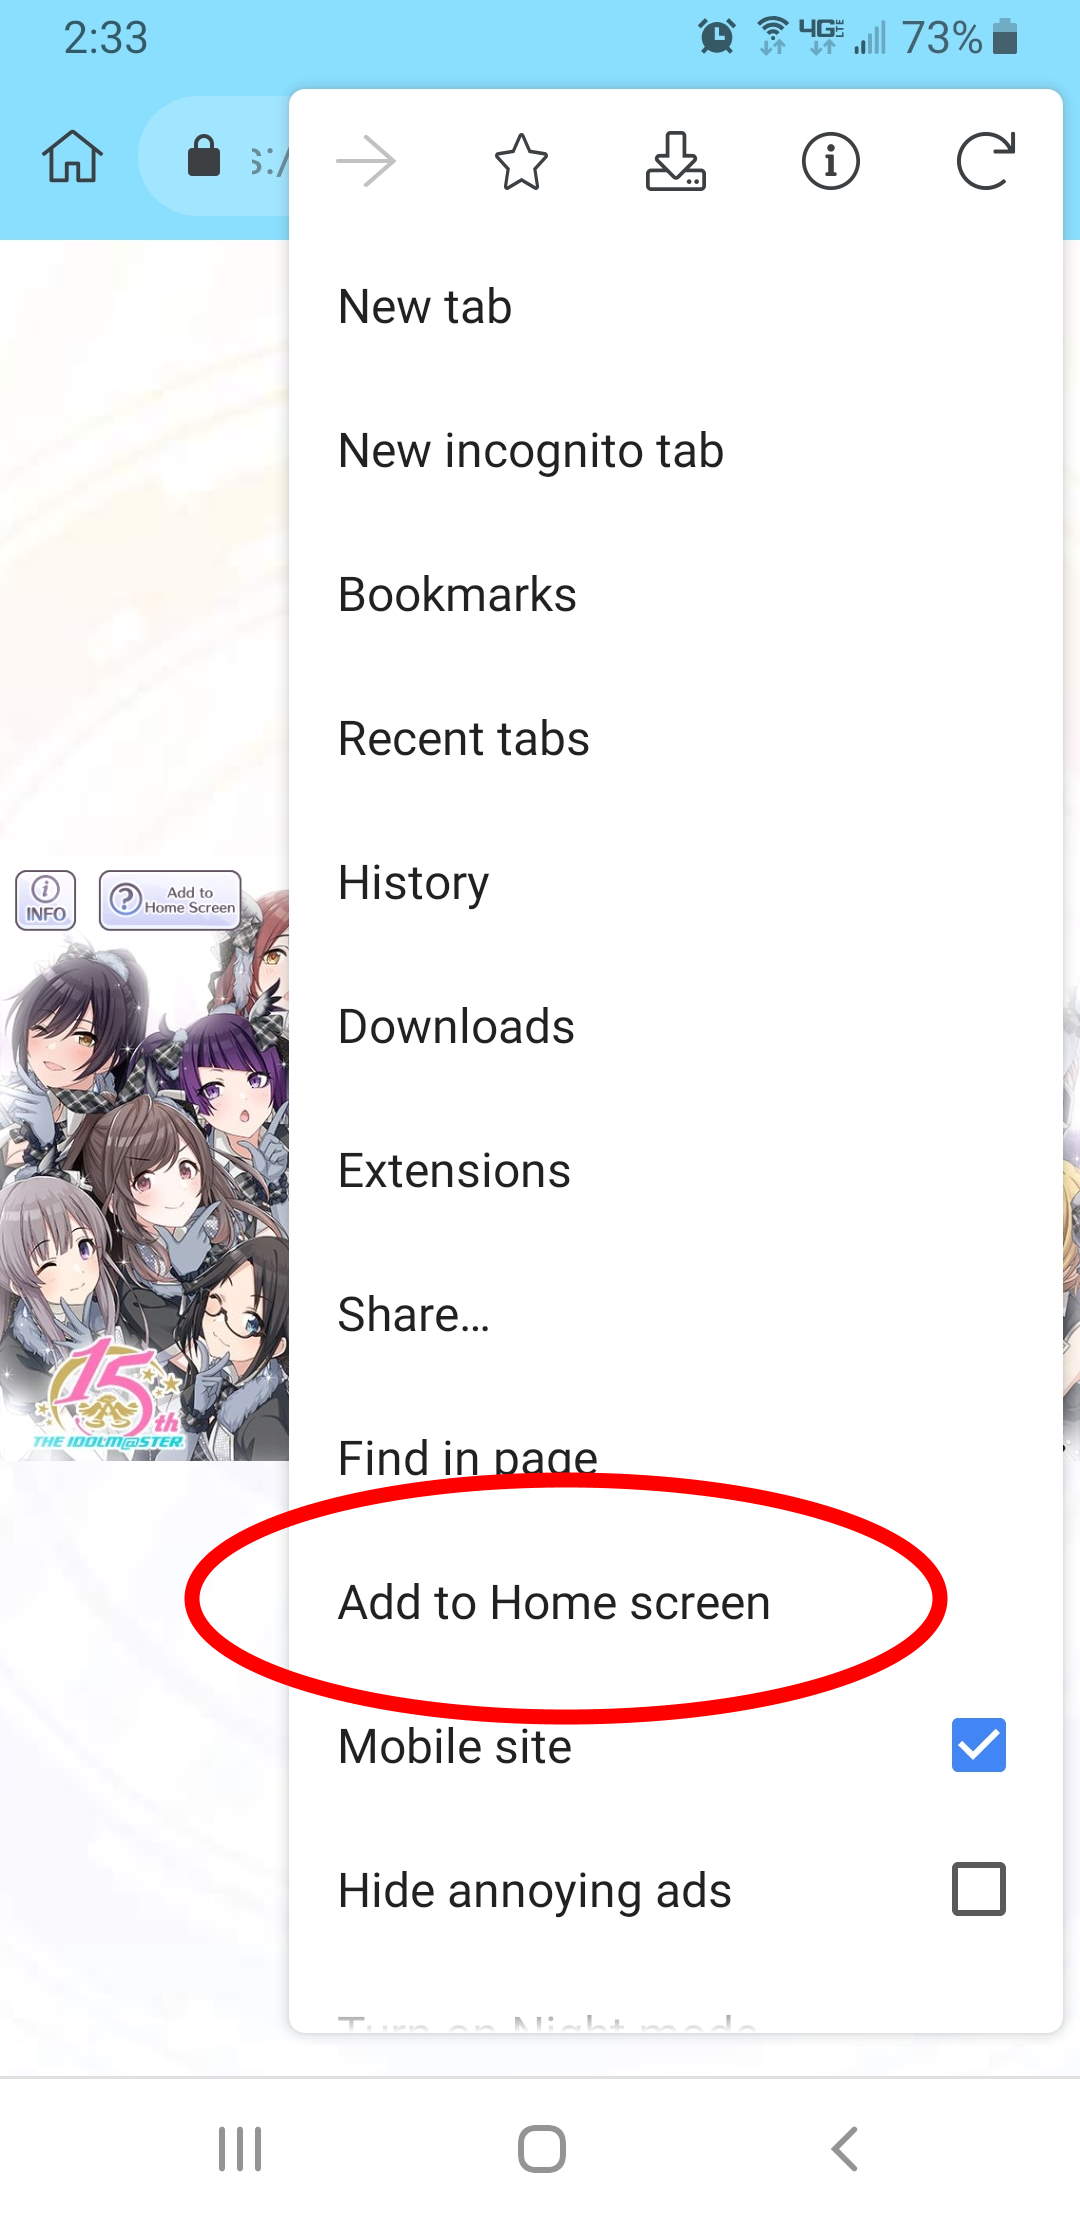 Click Add to Home Screen